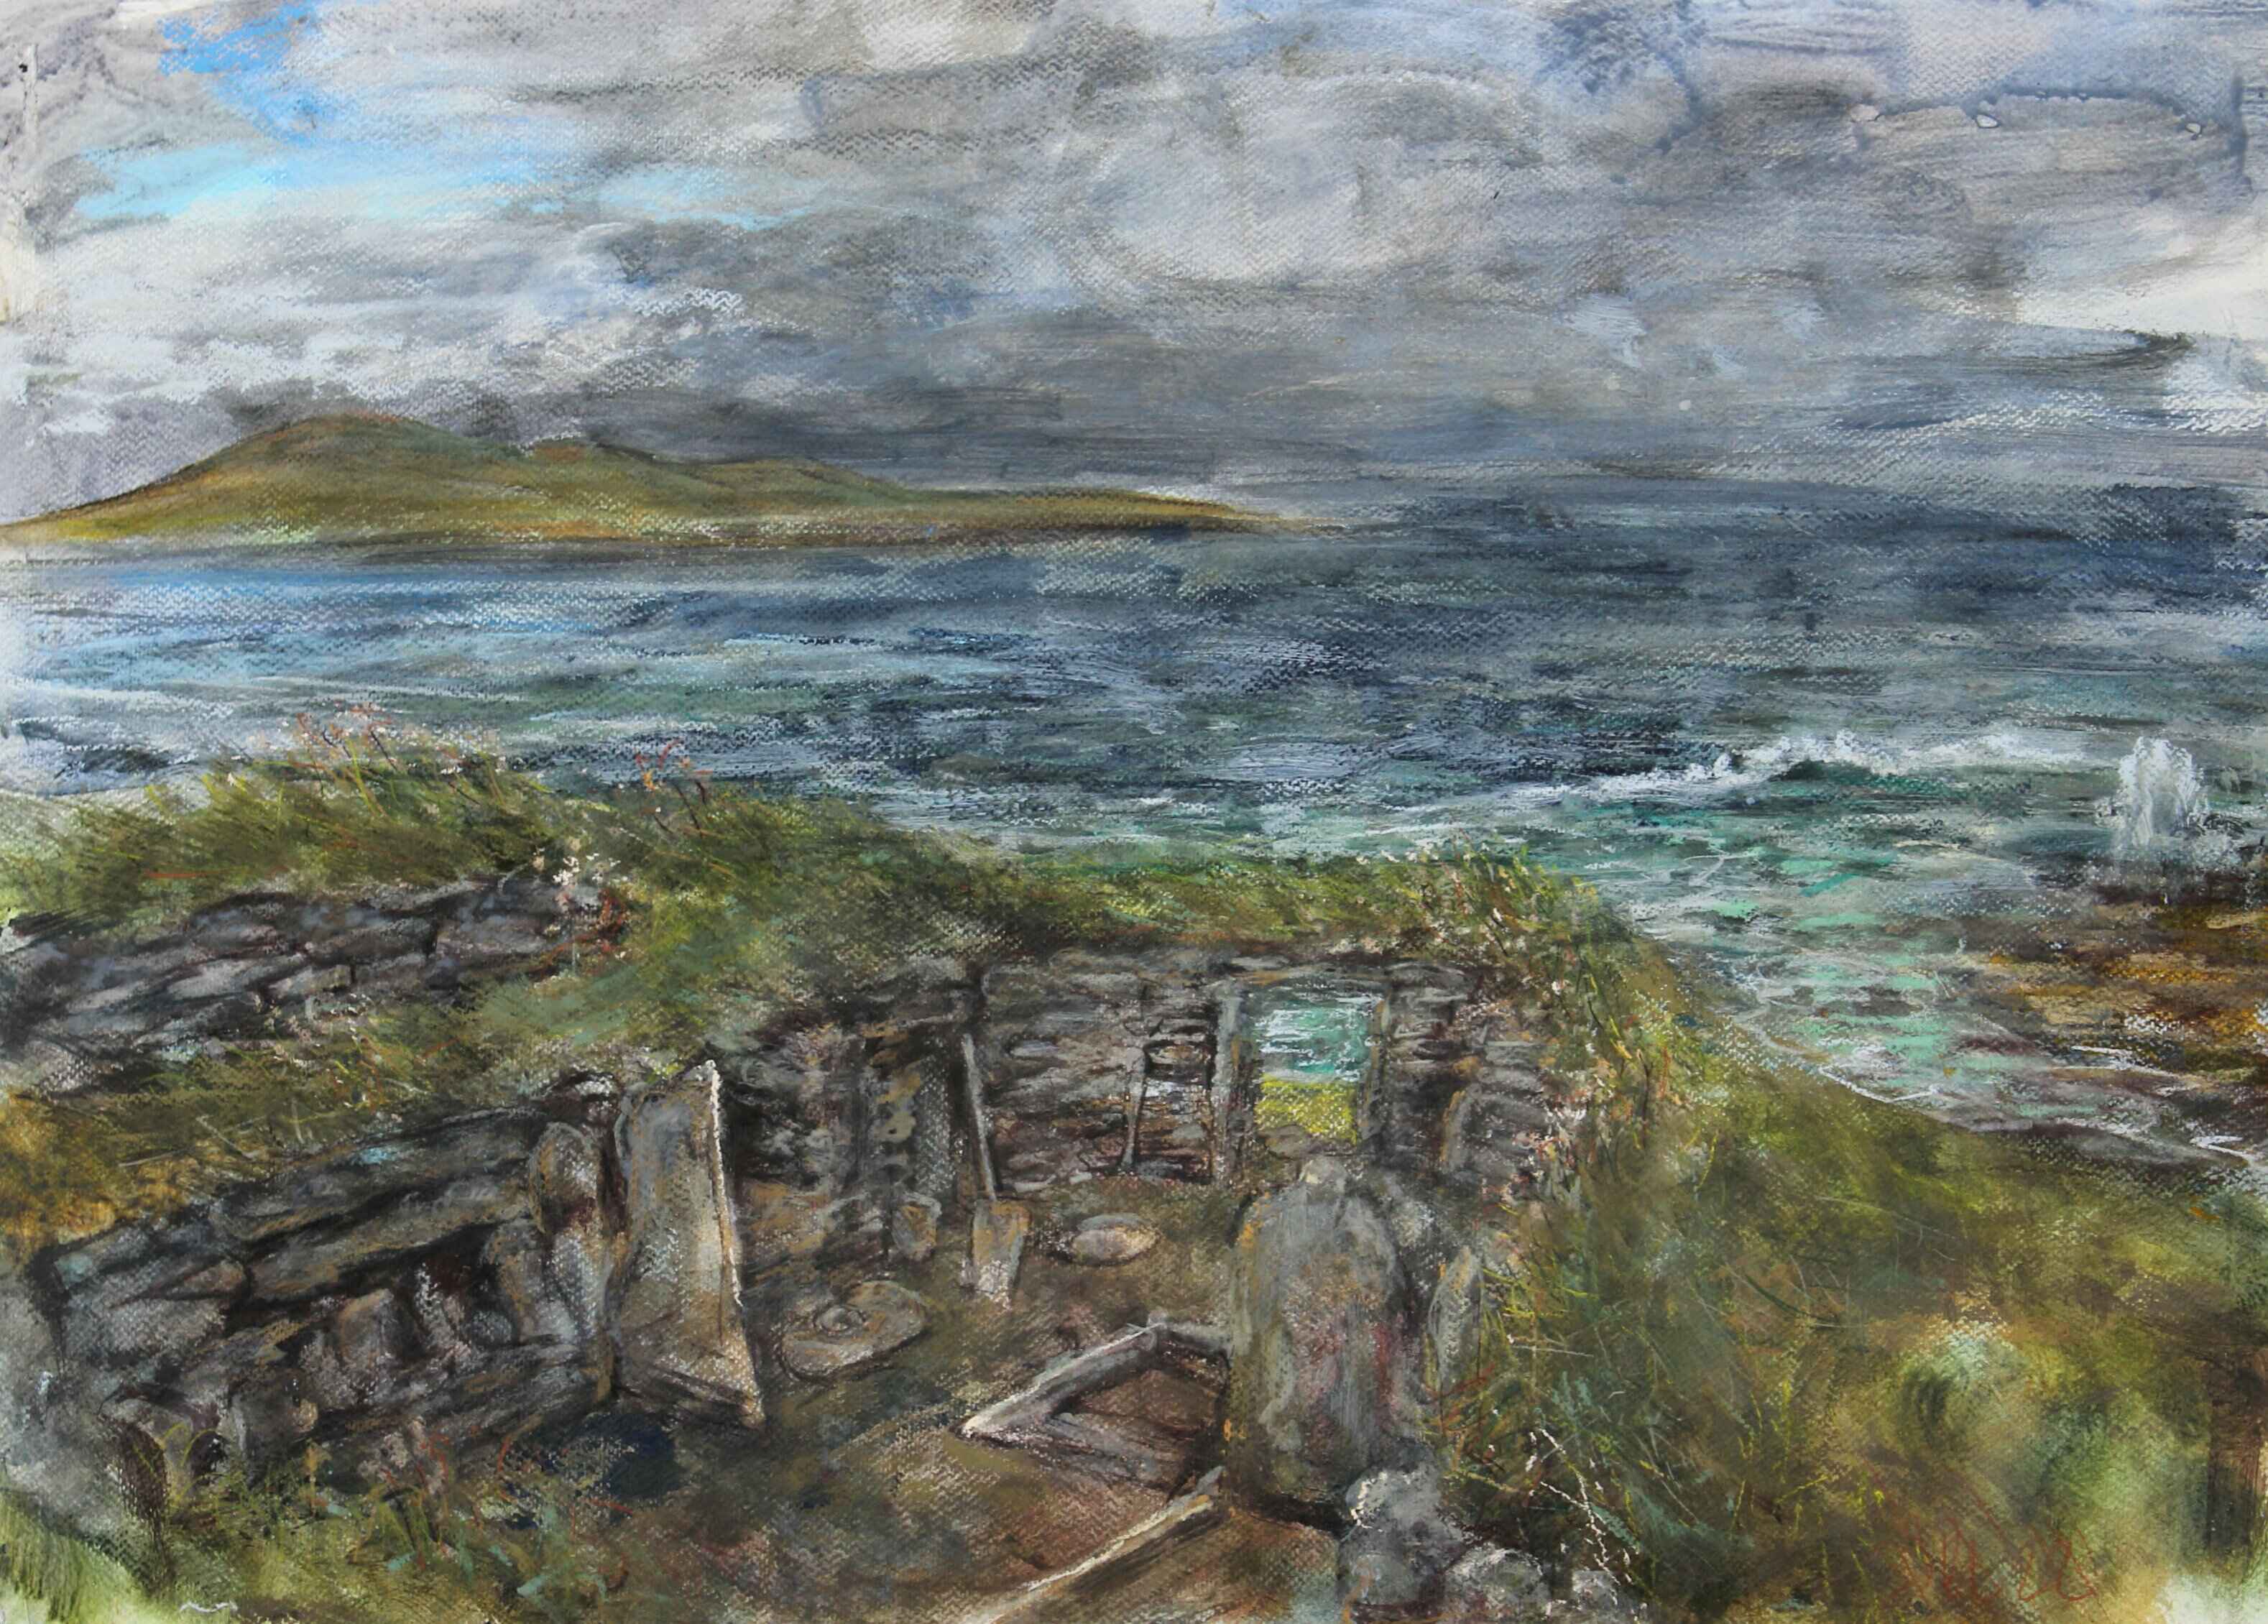 Knap of Hower, PapaWestray. Mixed media on paper. 50x70cm.